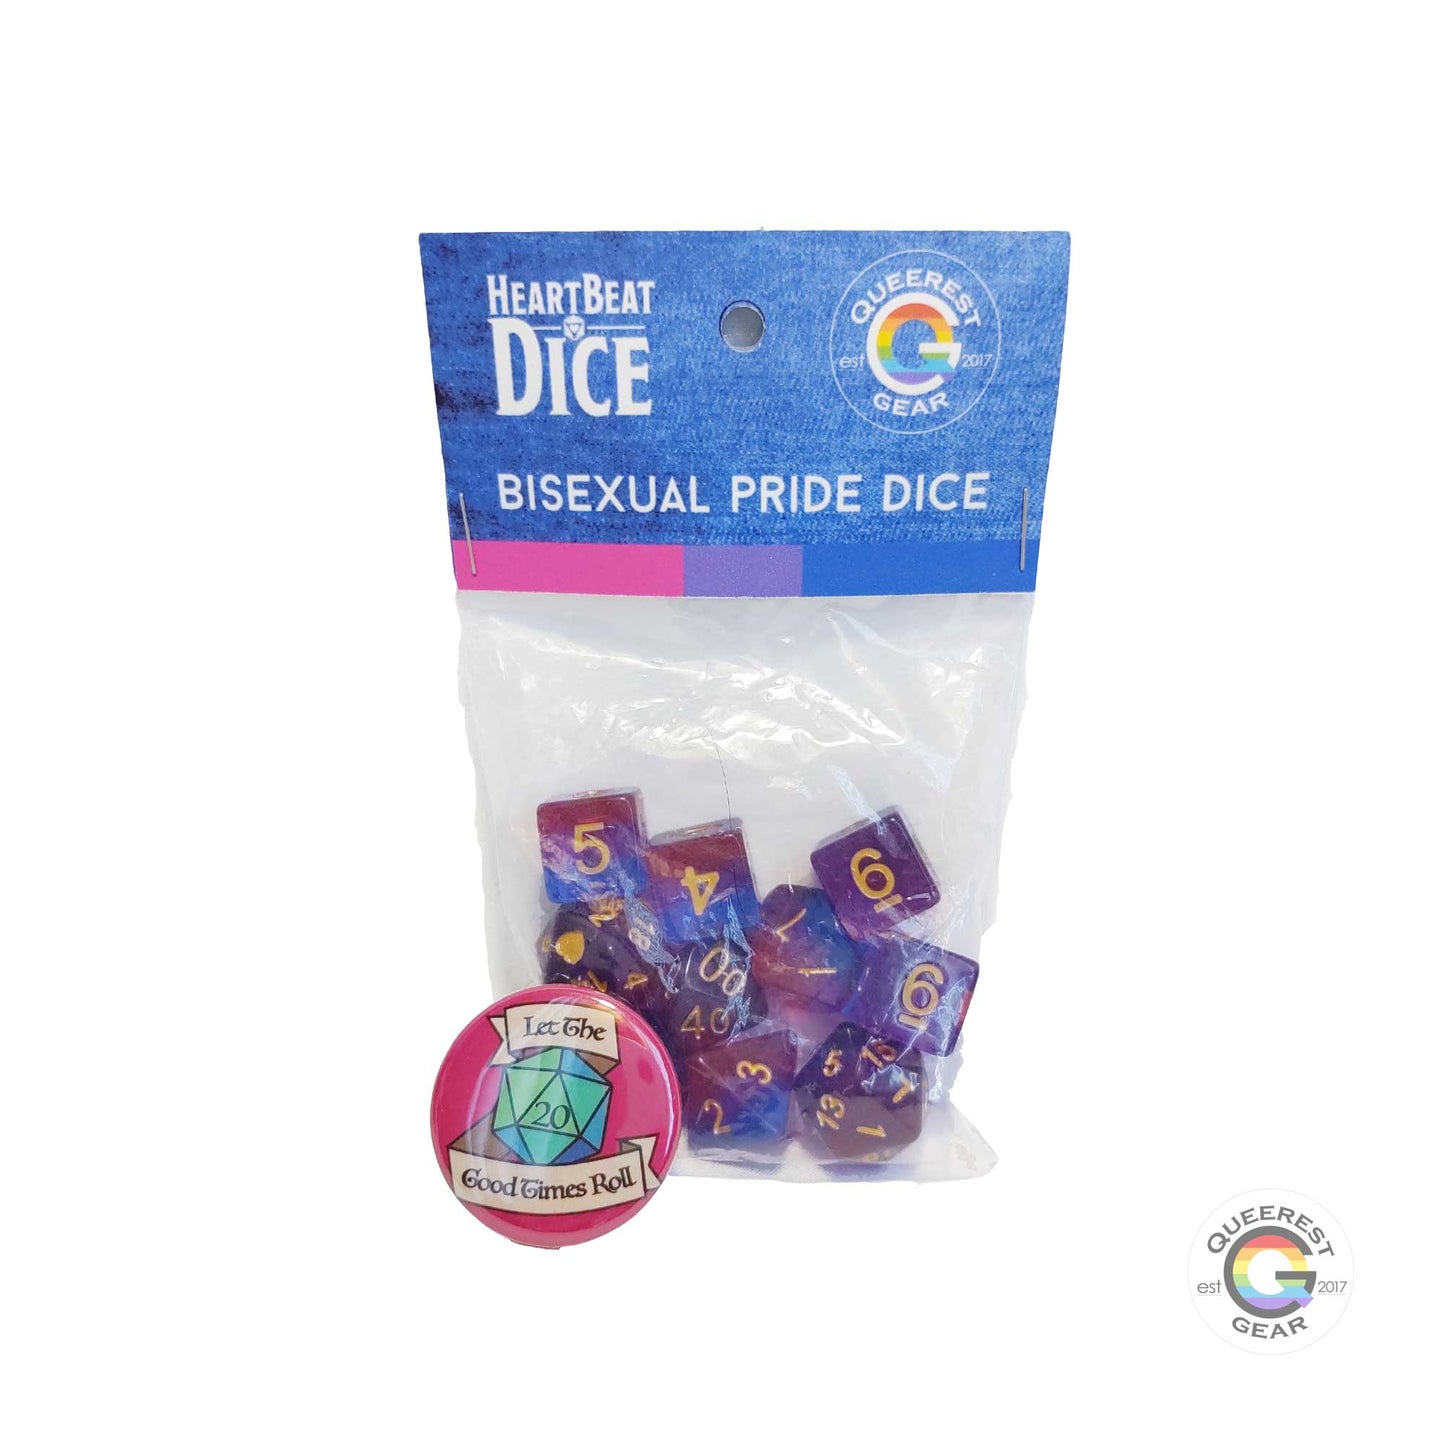 Bisexual pride dice in their packaging with a free “let the good times roll” button